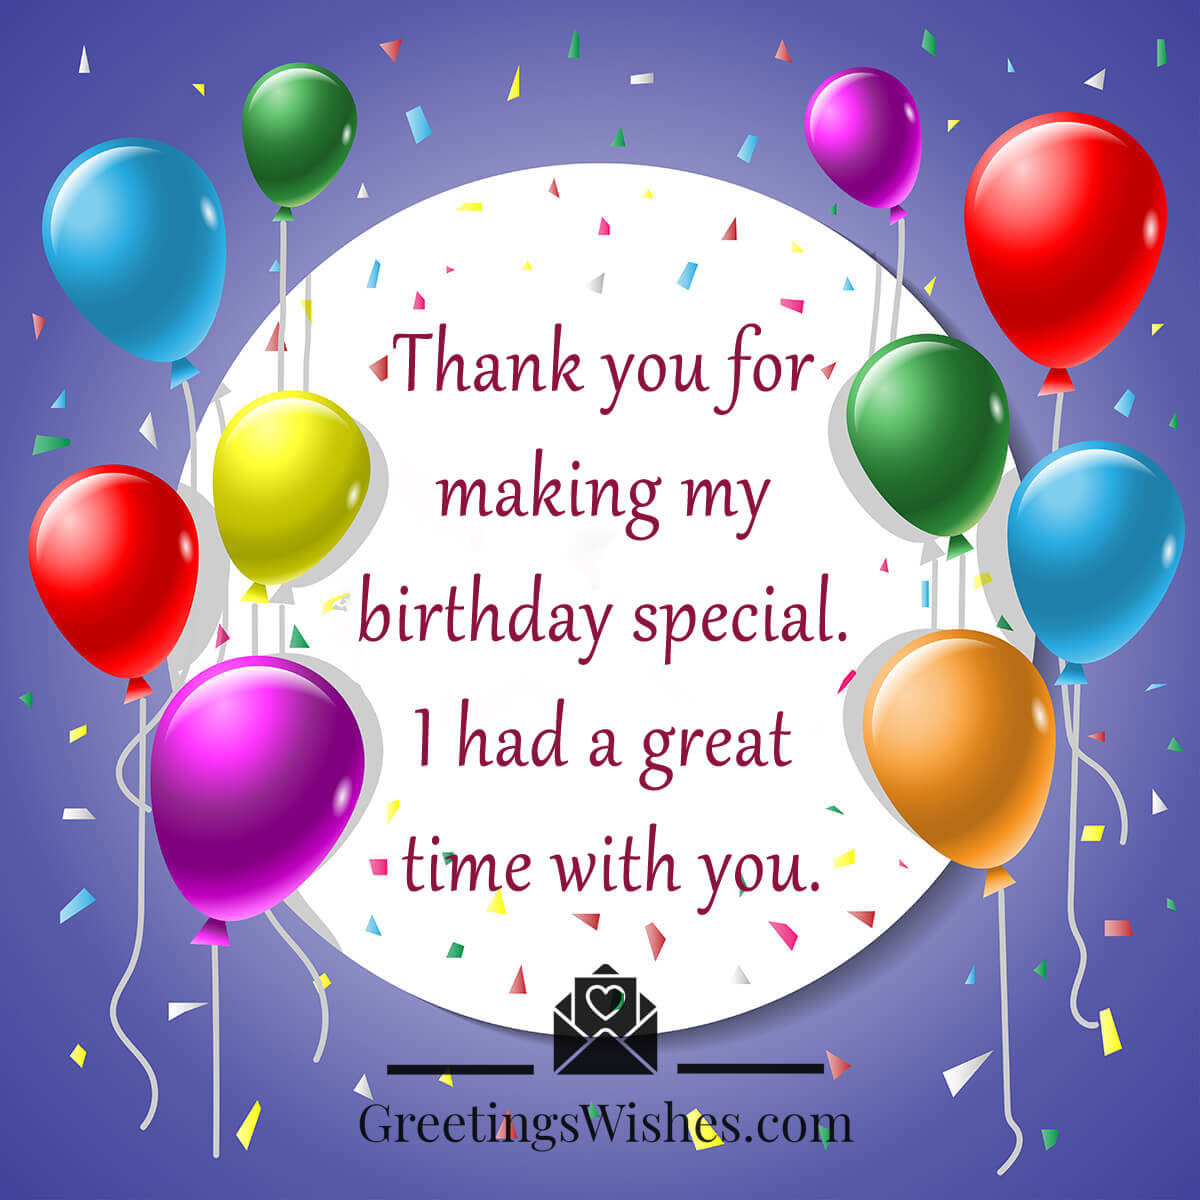 Thank You Birthday Messages - Greetings Wishes